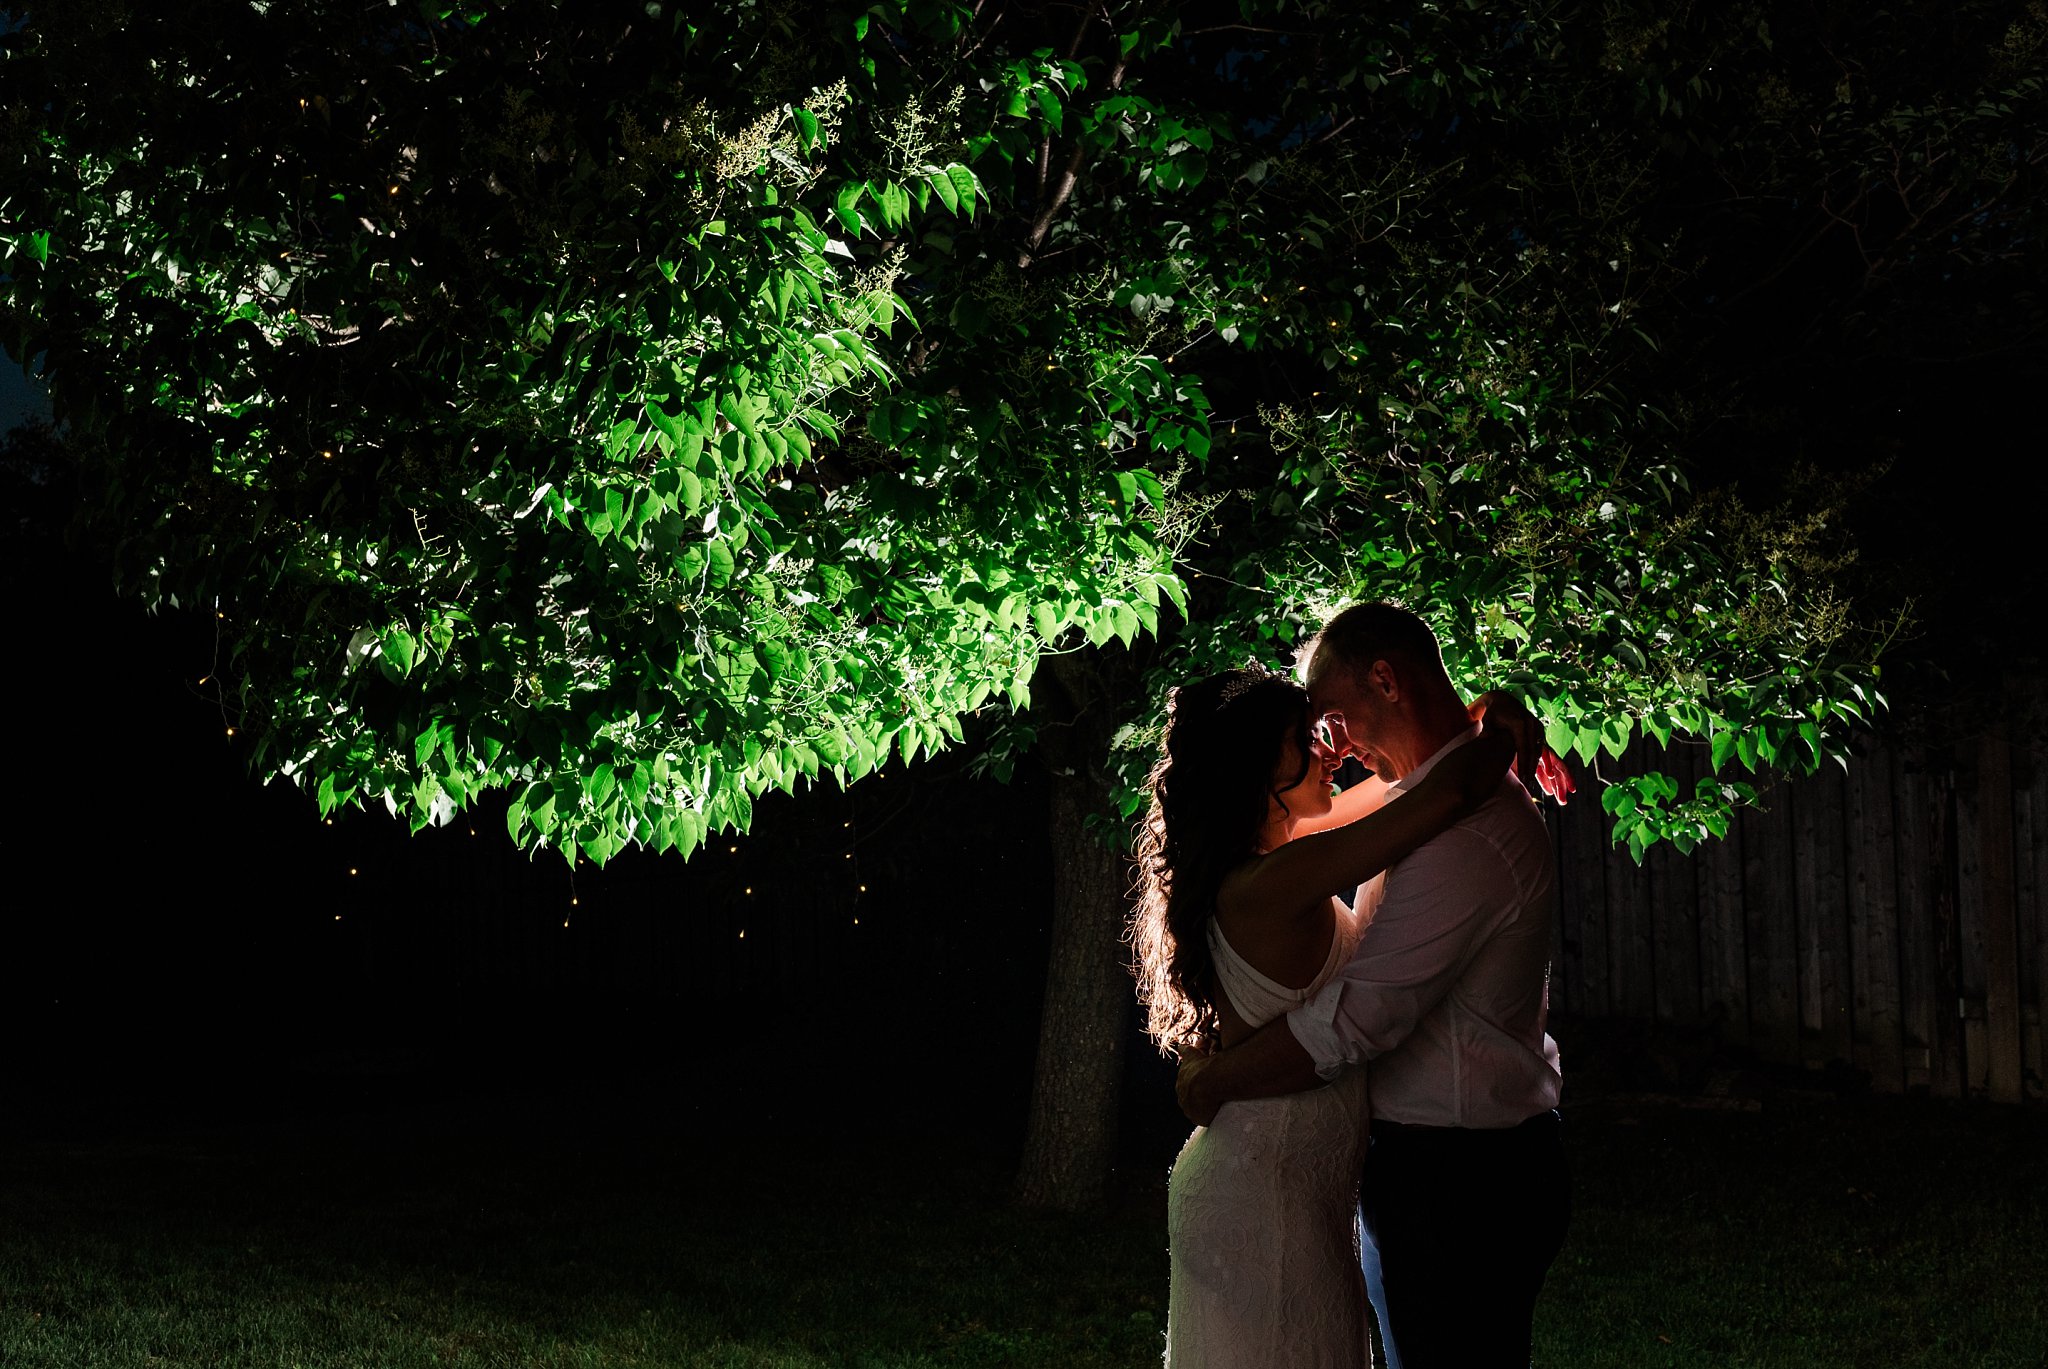 a night photo of the bride and groom hugging, with a light behind illuminating them and a tree  kelowna wedding photographer